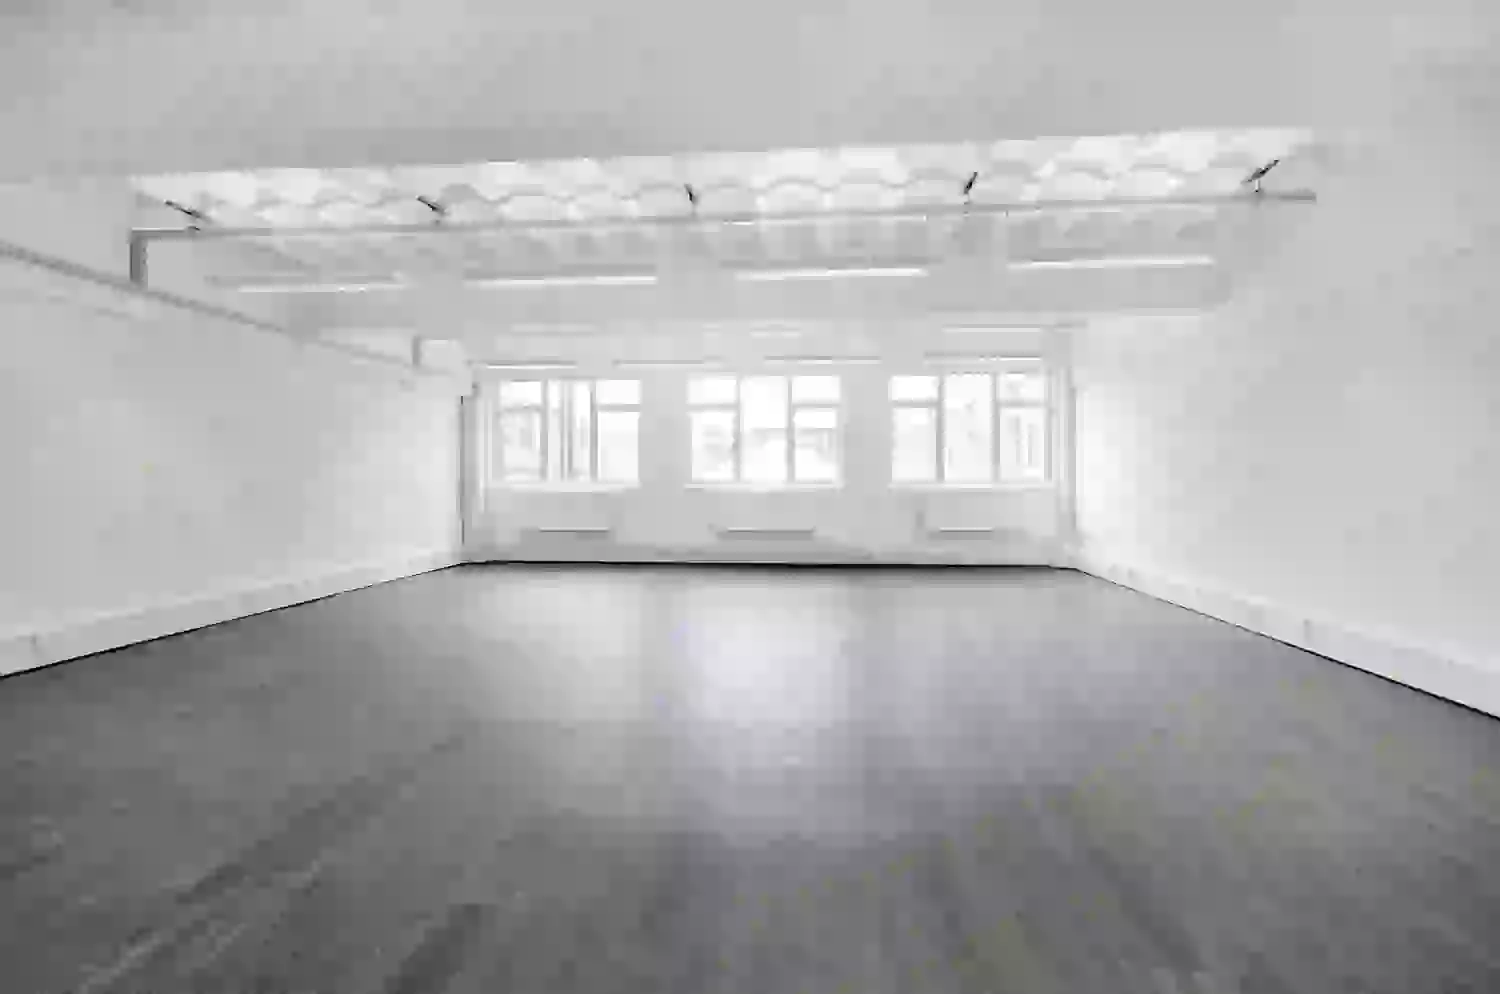 Office space to rent at The Light Box, 111 Power Road, Chiswick, London, unit PC.113, 733 sq ft (68 sq m).